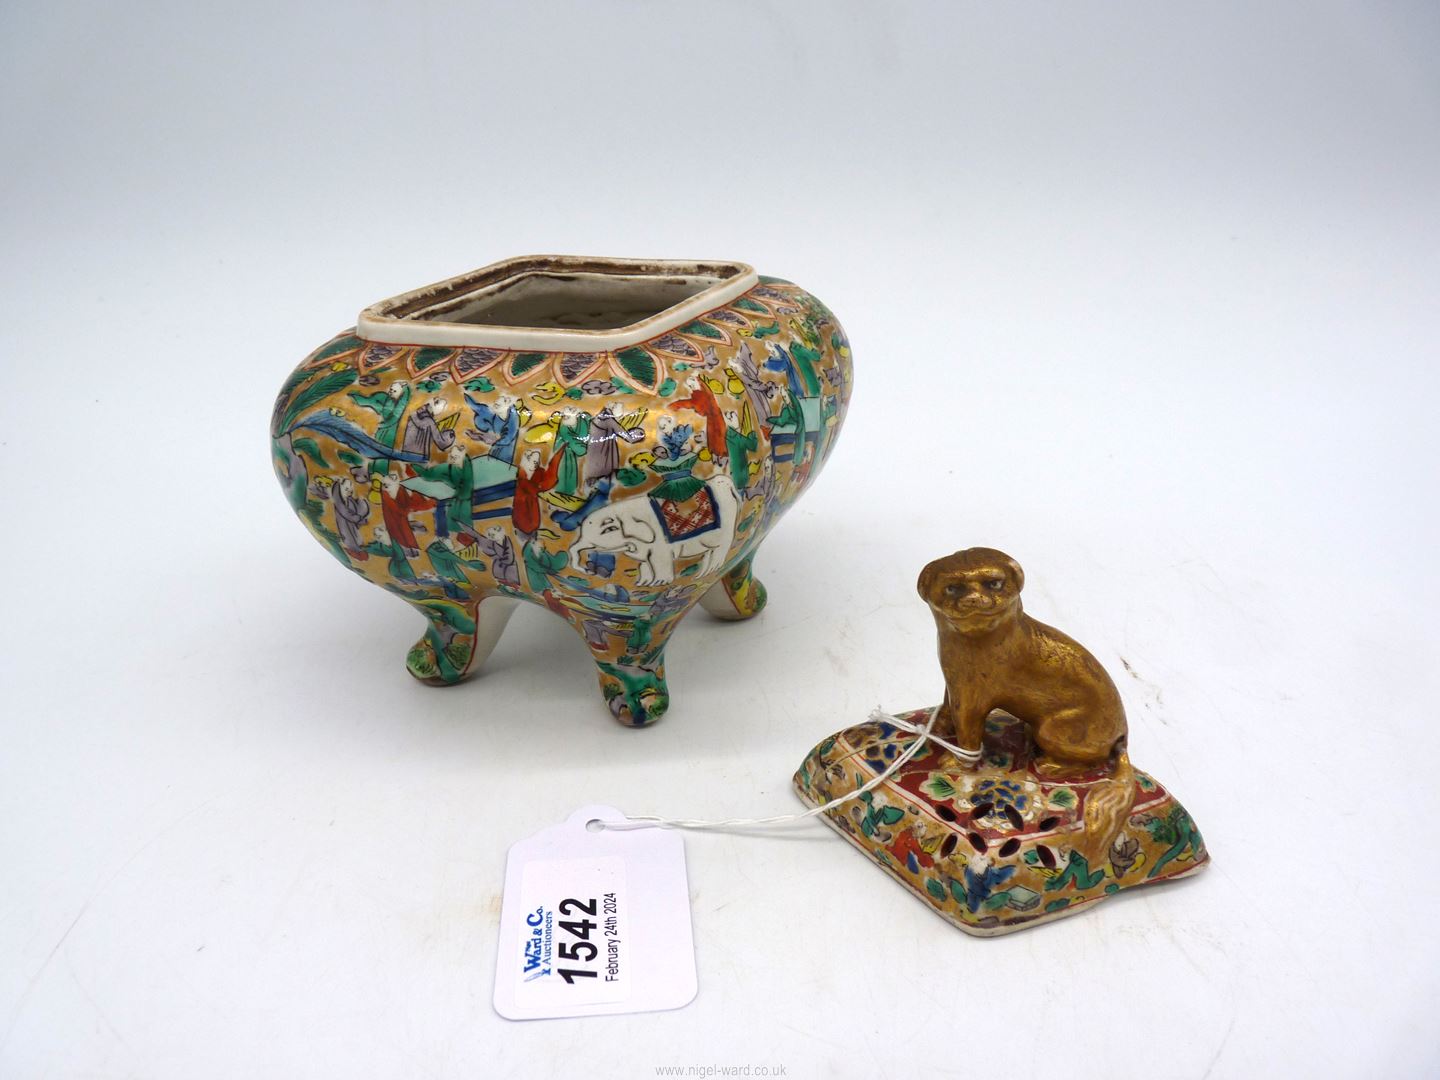 An Oriental diamond shaped footed and lidded pot with scenes of Elephants and sages with papers at - Image 2 of 3